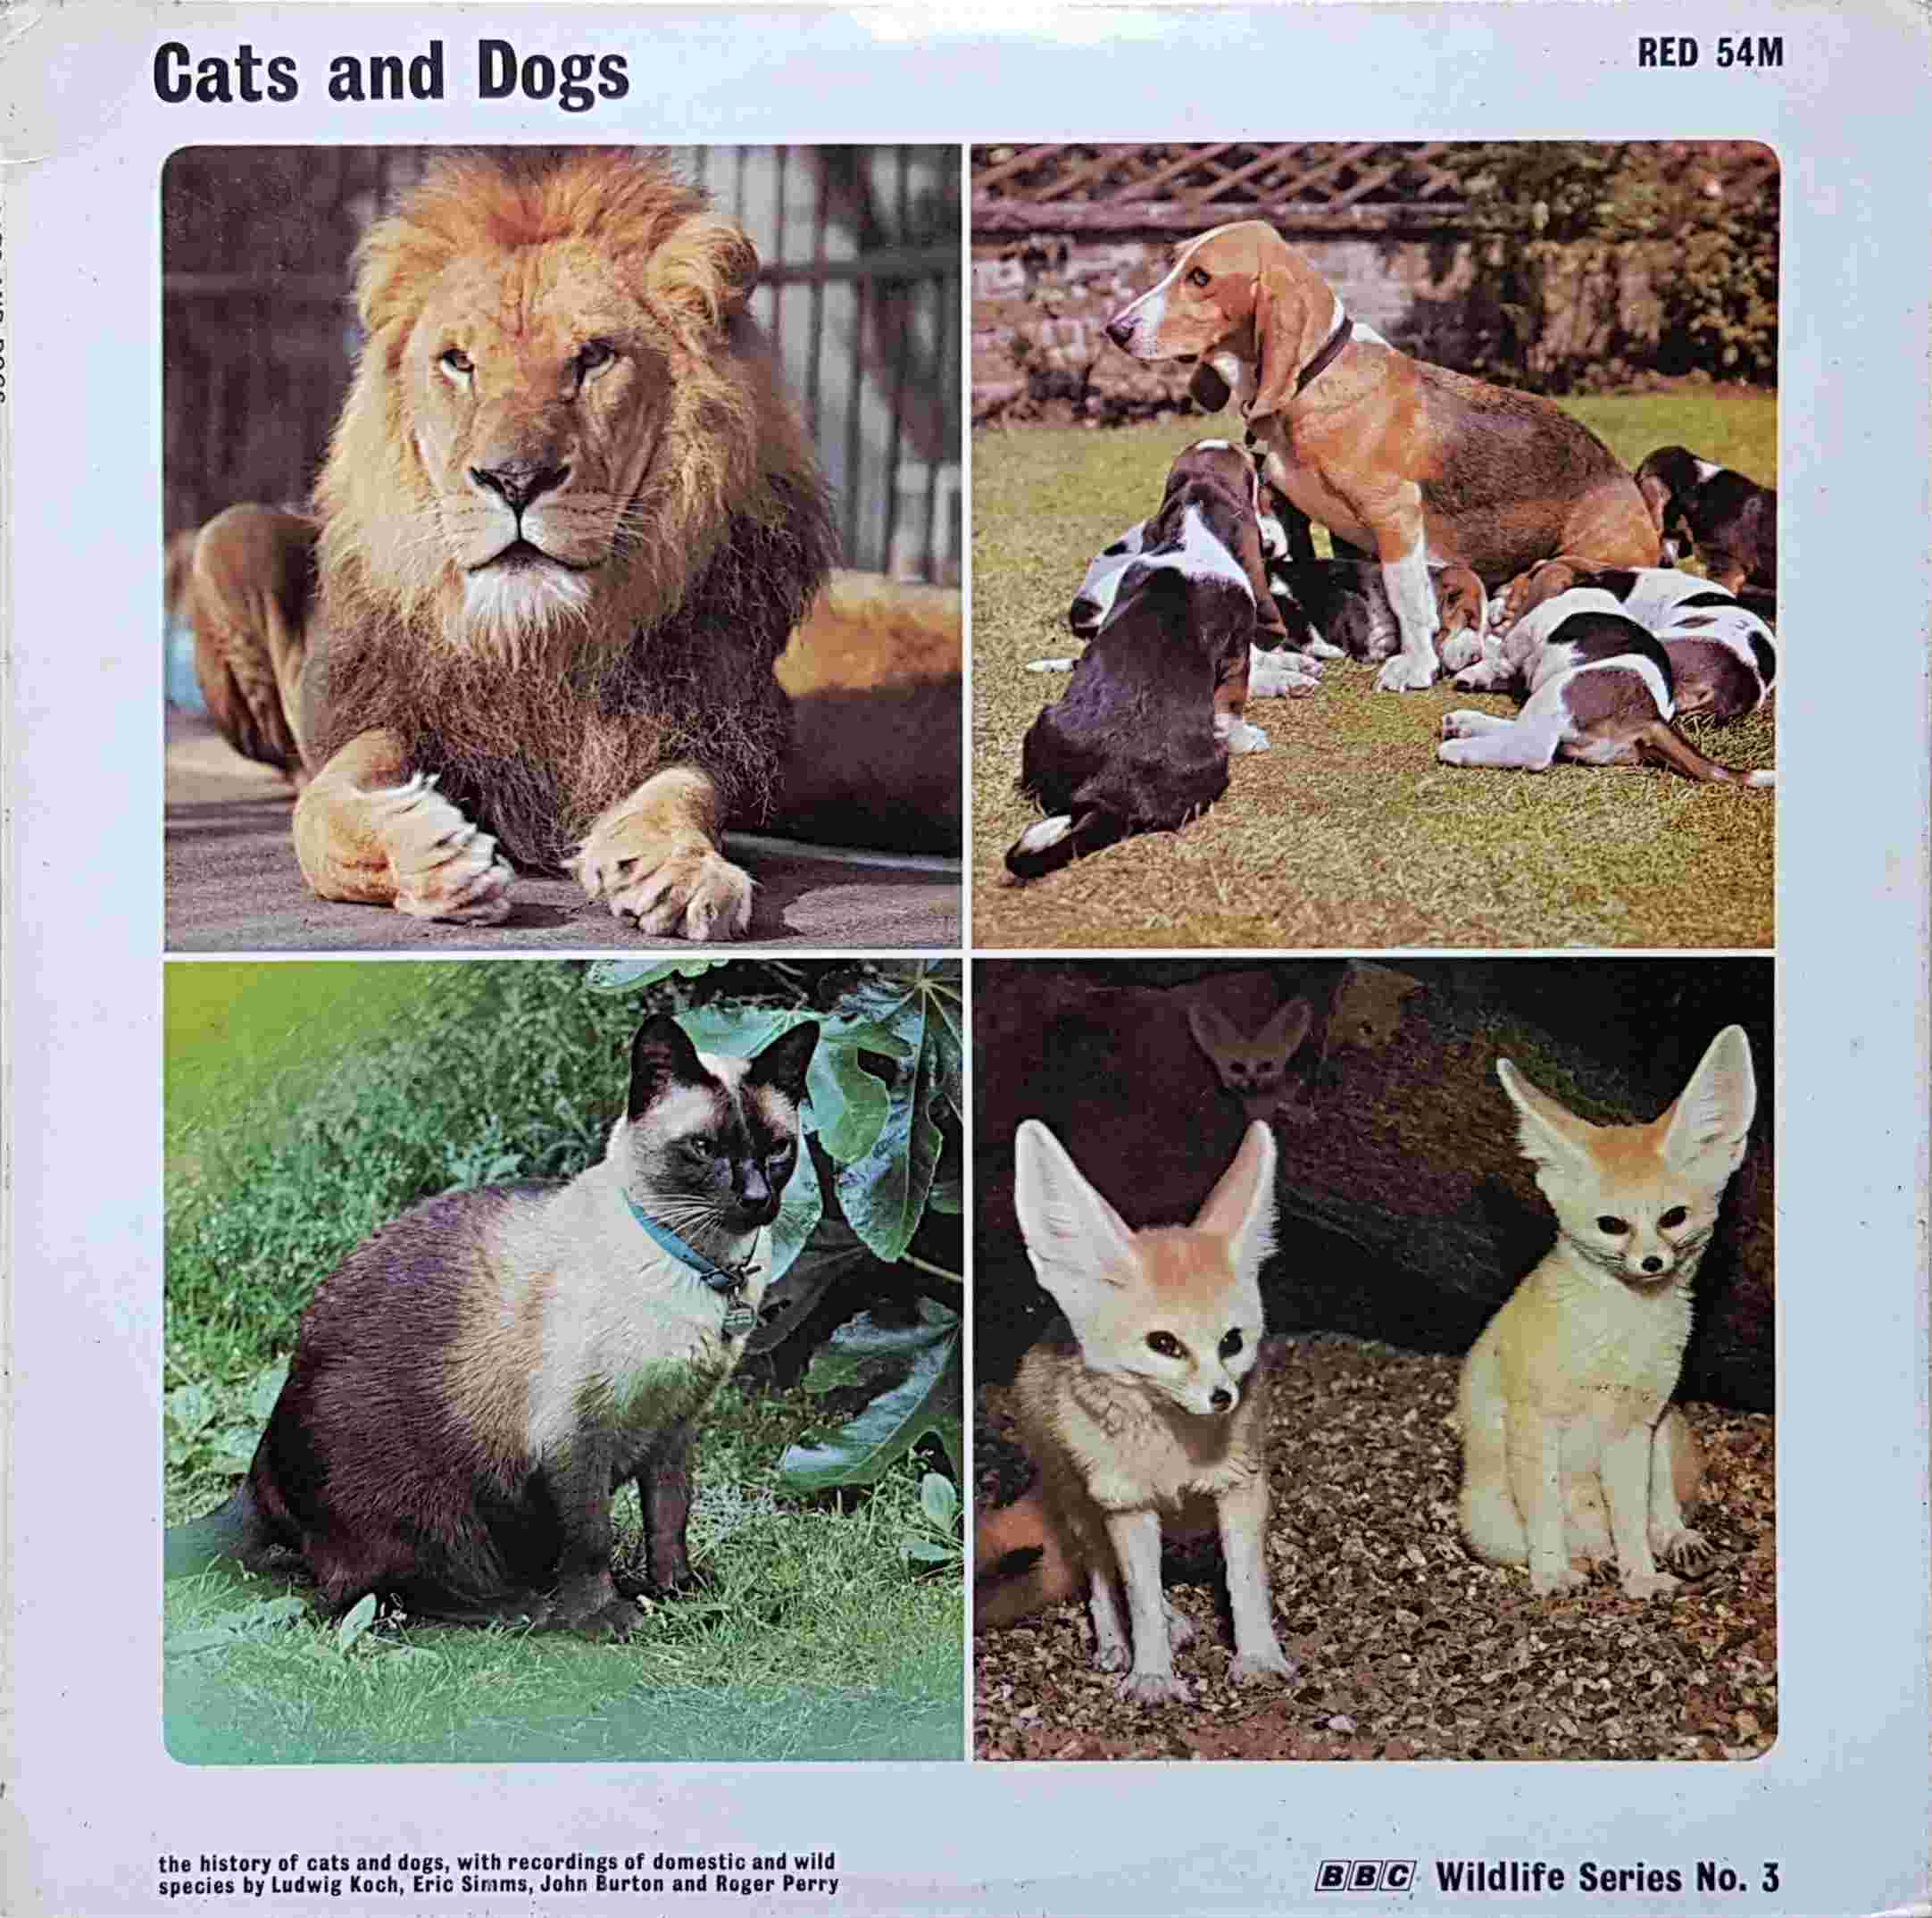 Picture of RED 54 Cats and Dogs - BBC wildlife series no. 3 by artist Various from the BBC albums - Records and Tapes library